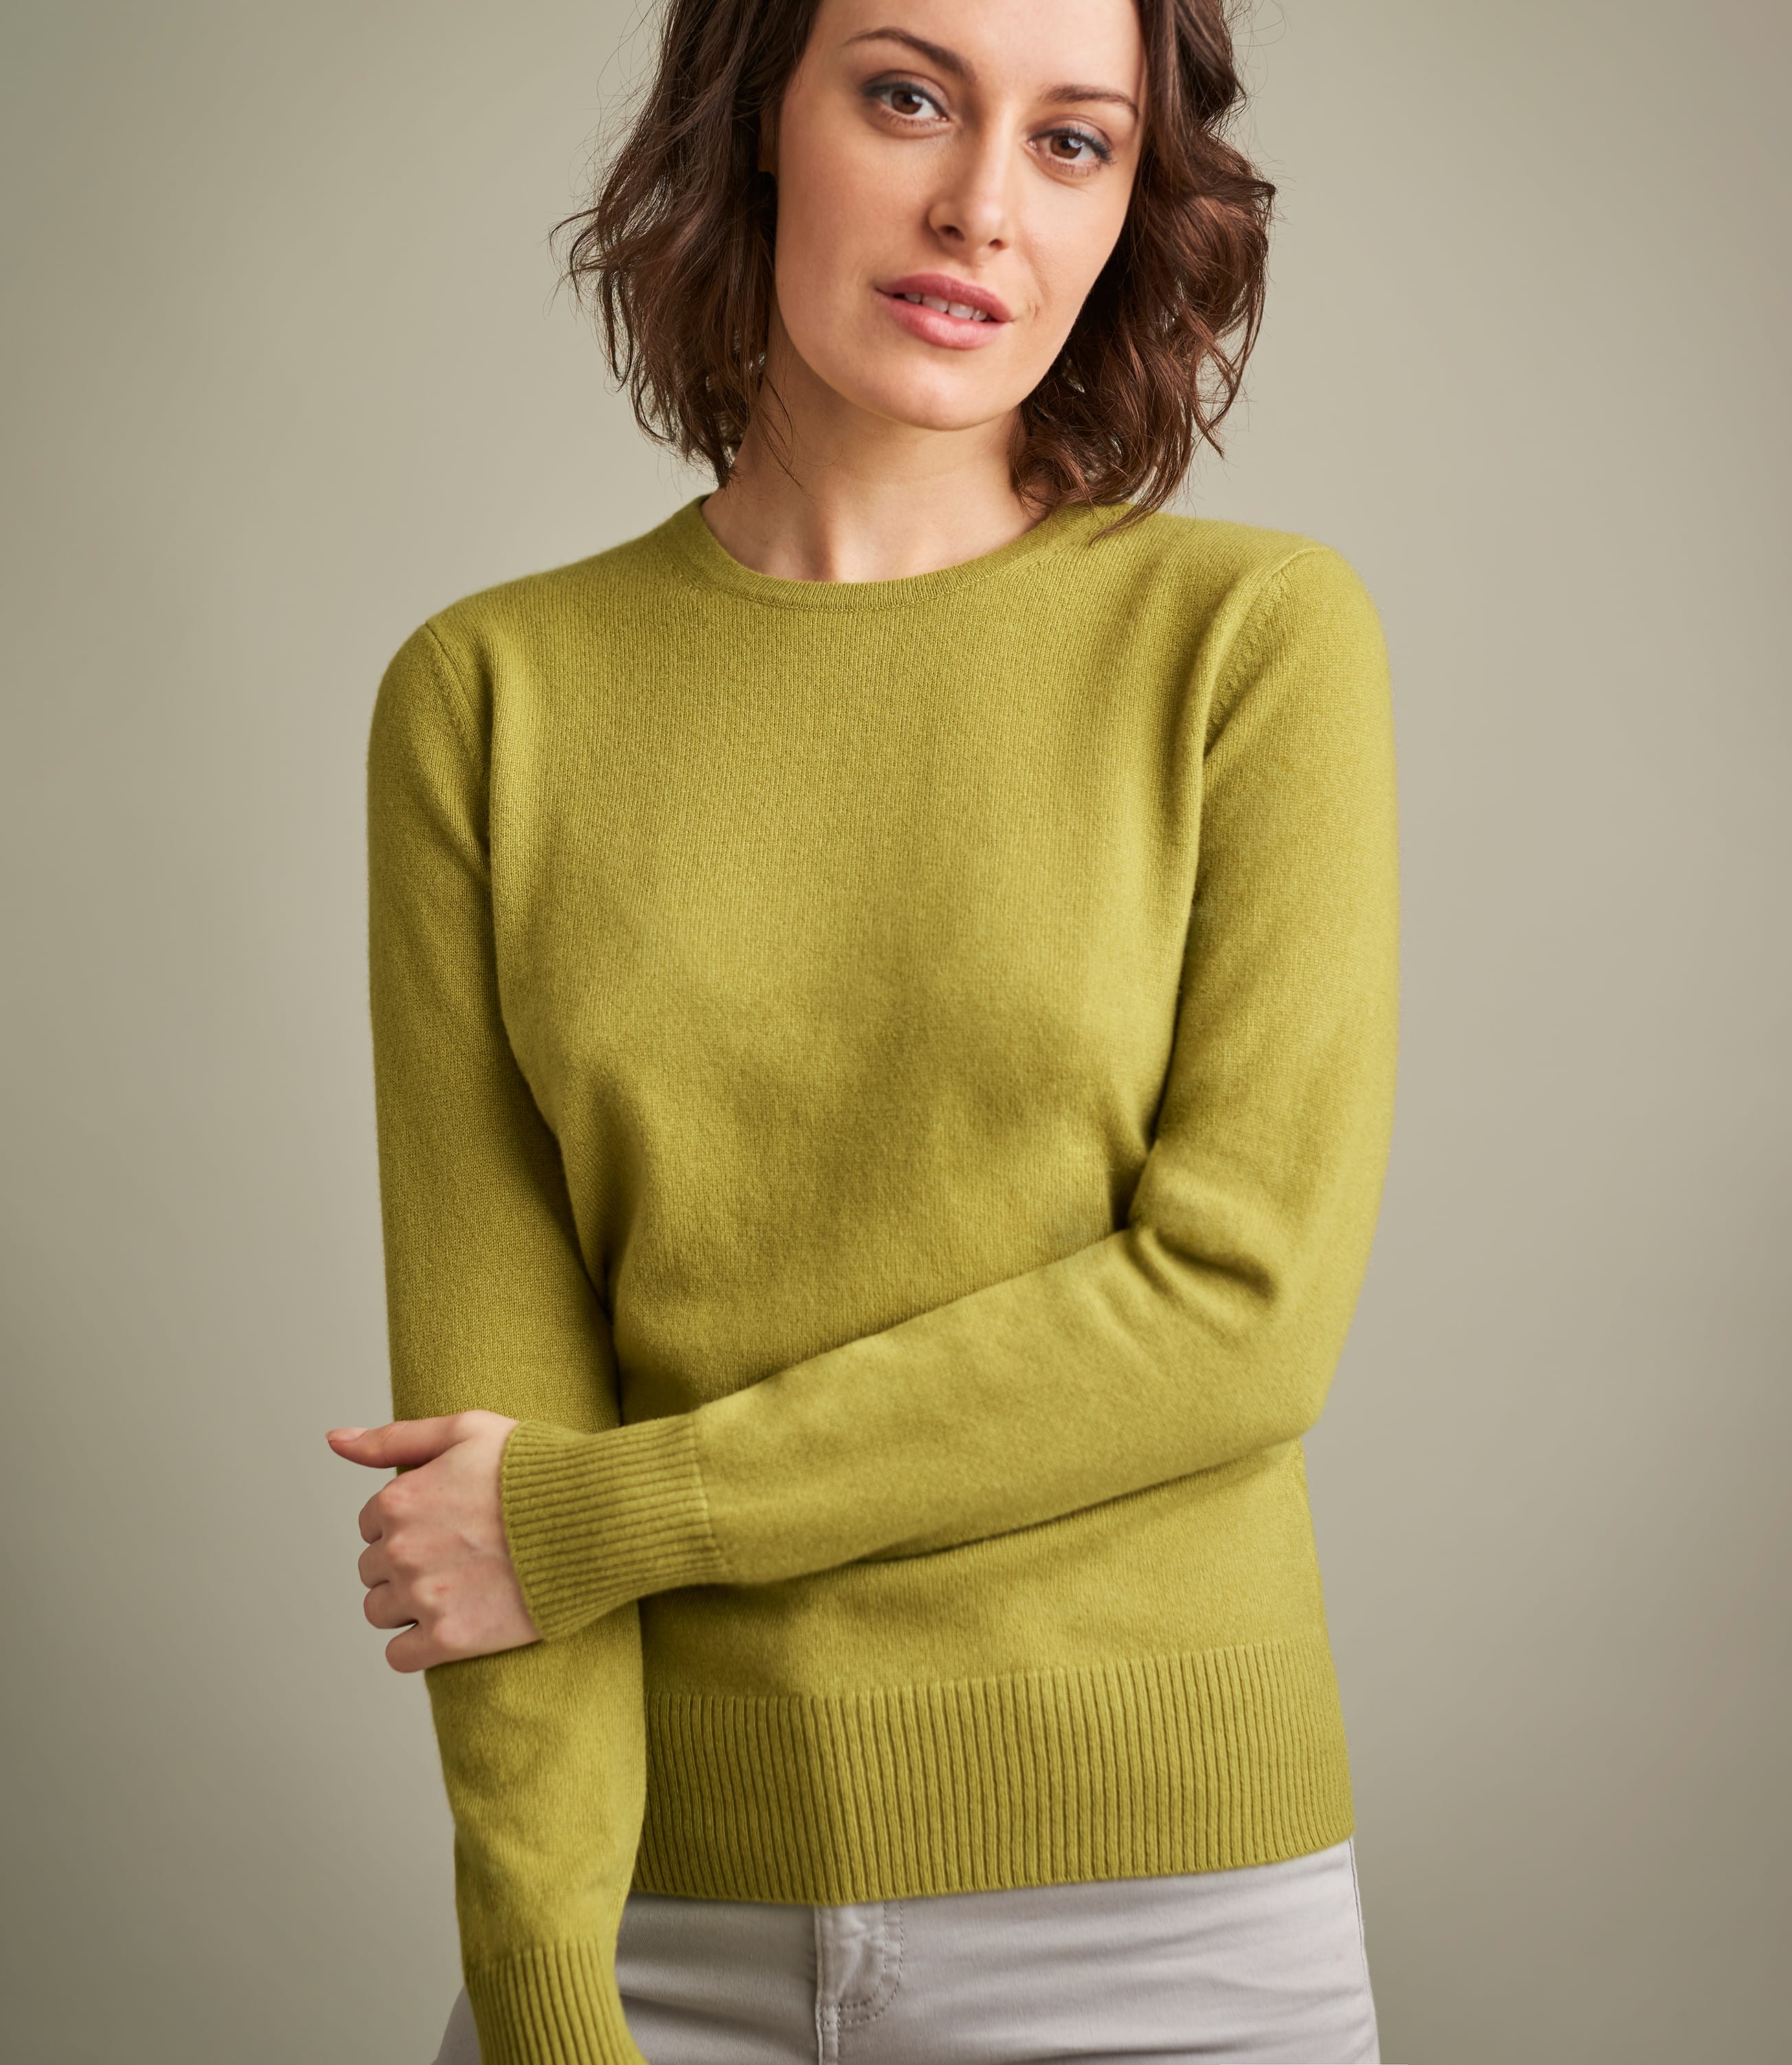 Women's 100% Pure Cashmere Jumpers & Sweaters | WoolOvers UK